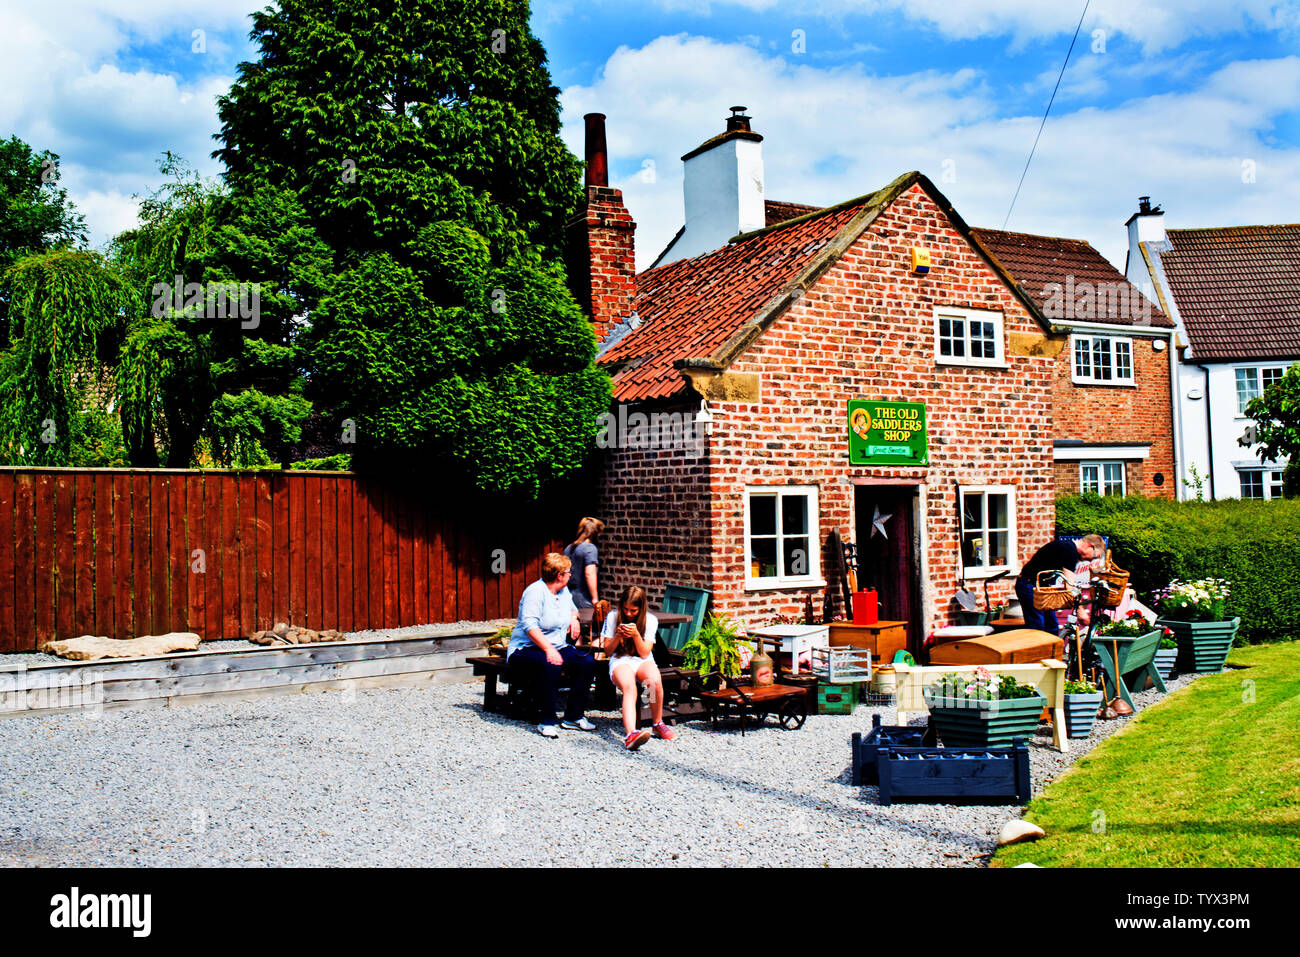 The Old Sadlers Shop, Great Smeaton, North Yorkshire, England Stock Photo